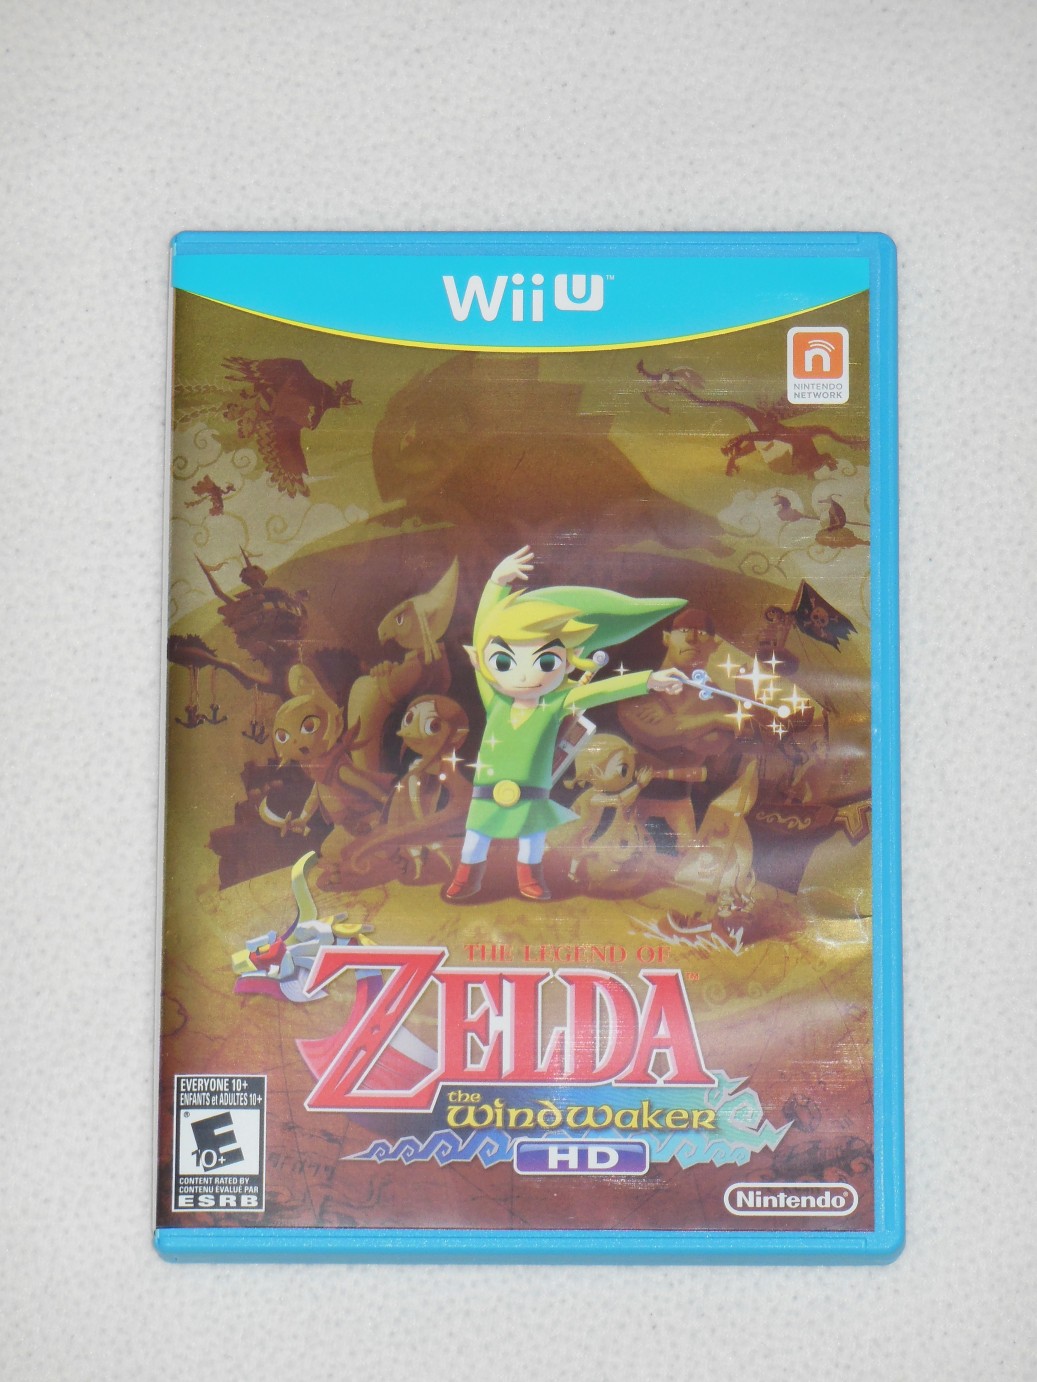 Unboxing Legend of Zelda: The Wind Waker HD - Limited Edition